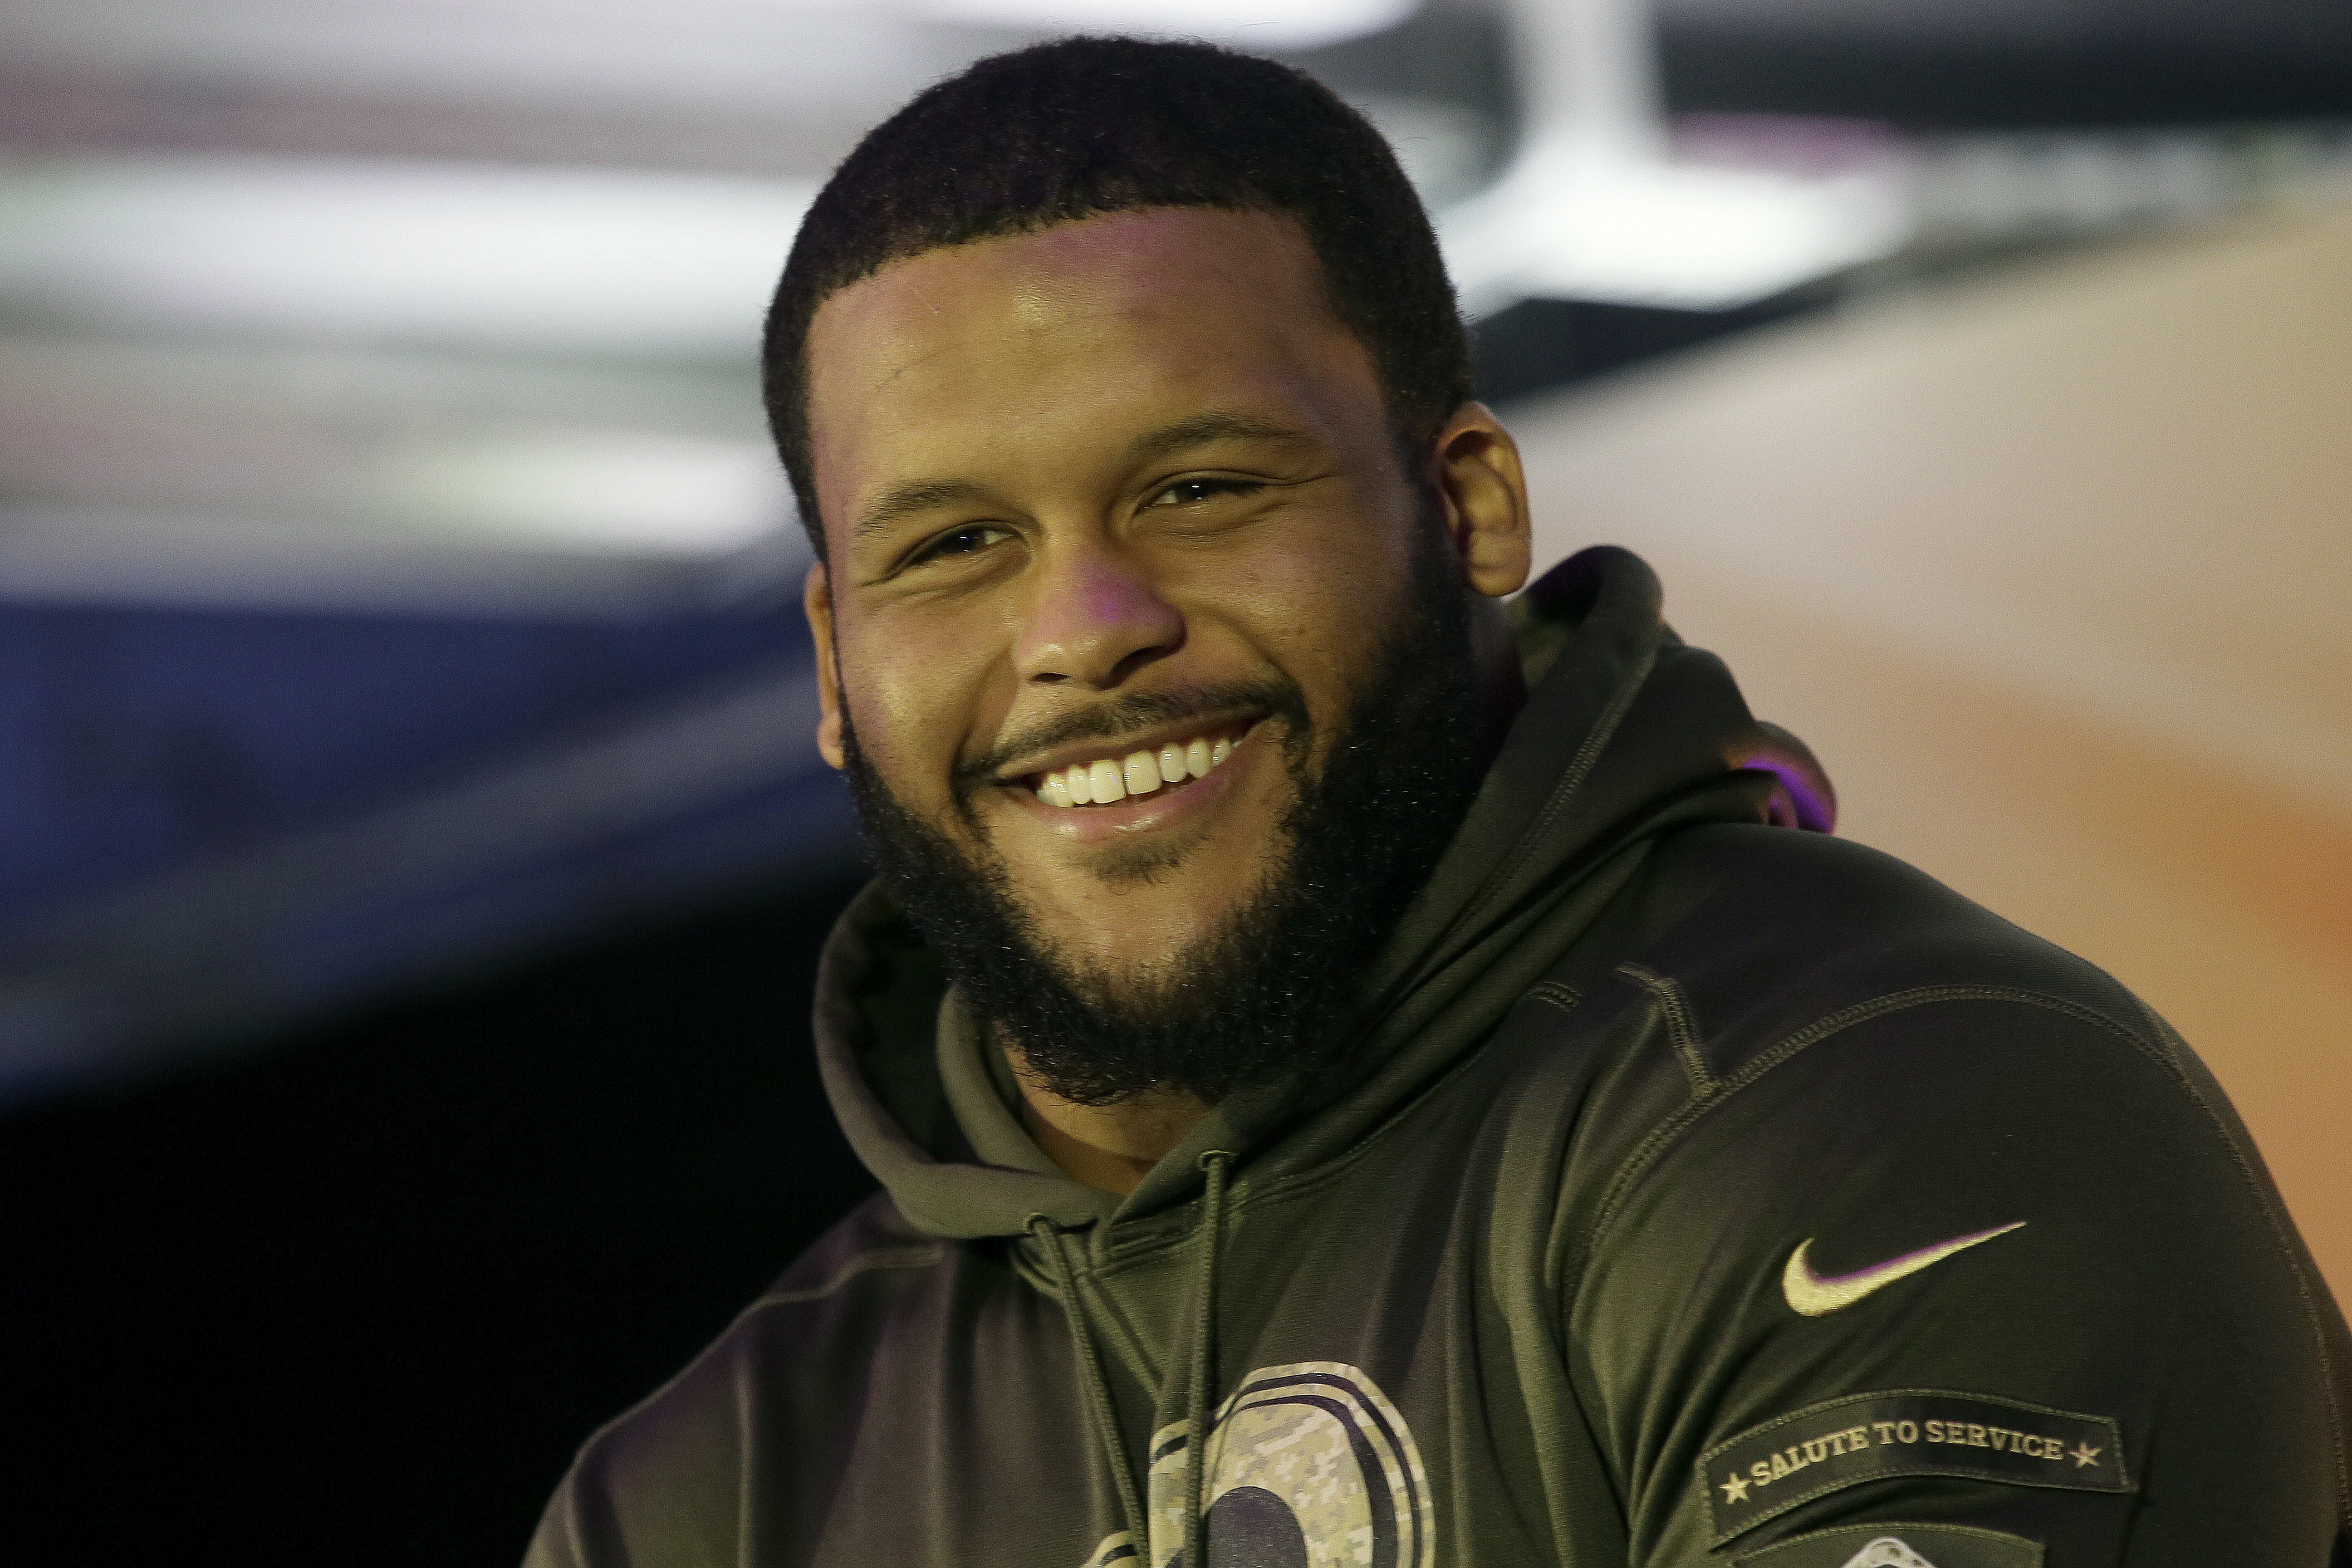 Aaron Donald ends holdout with record deal from LA Rams